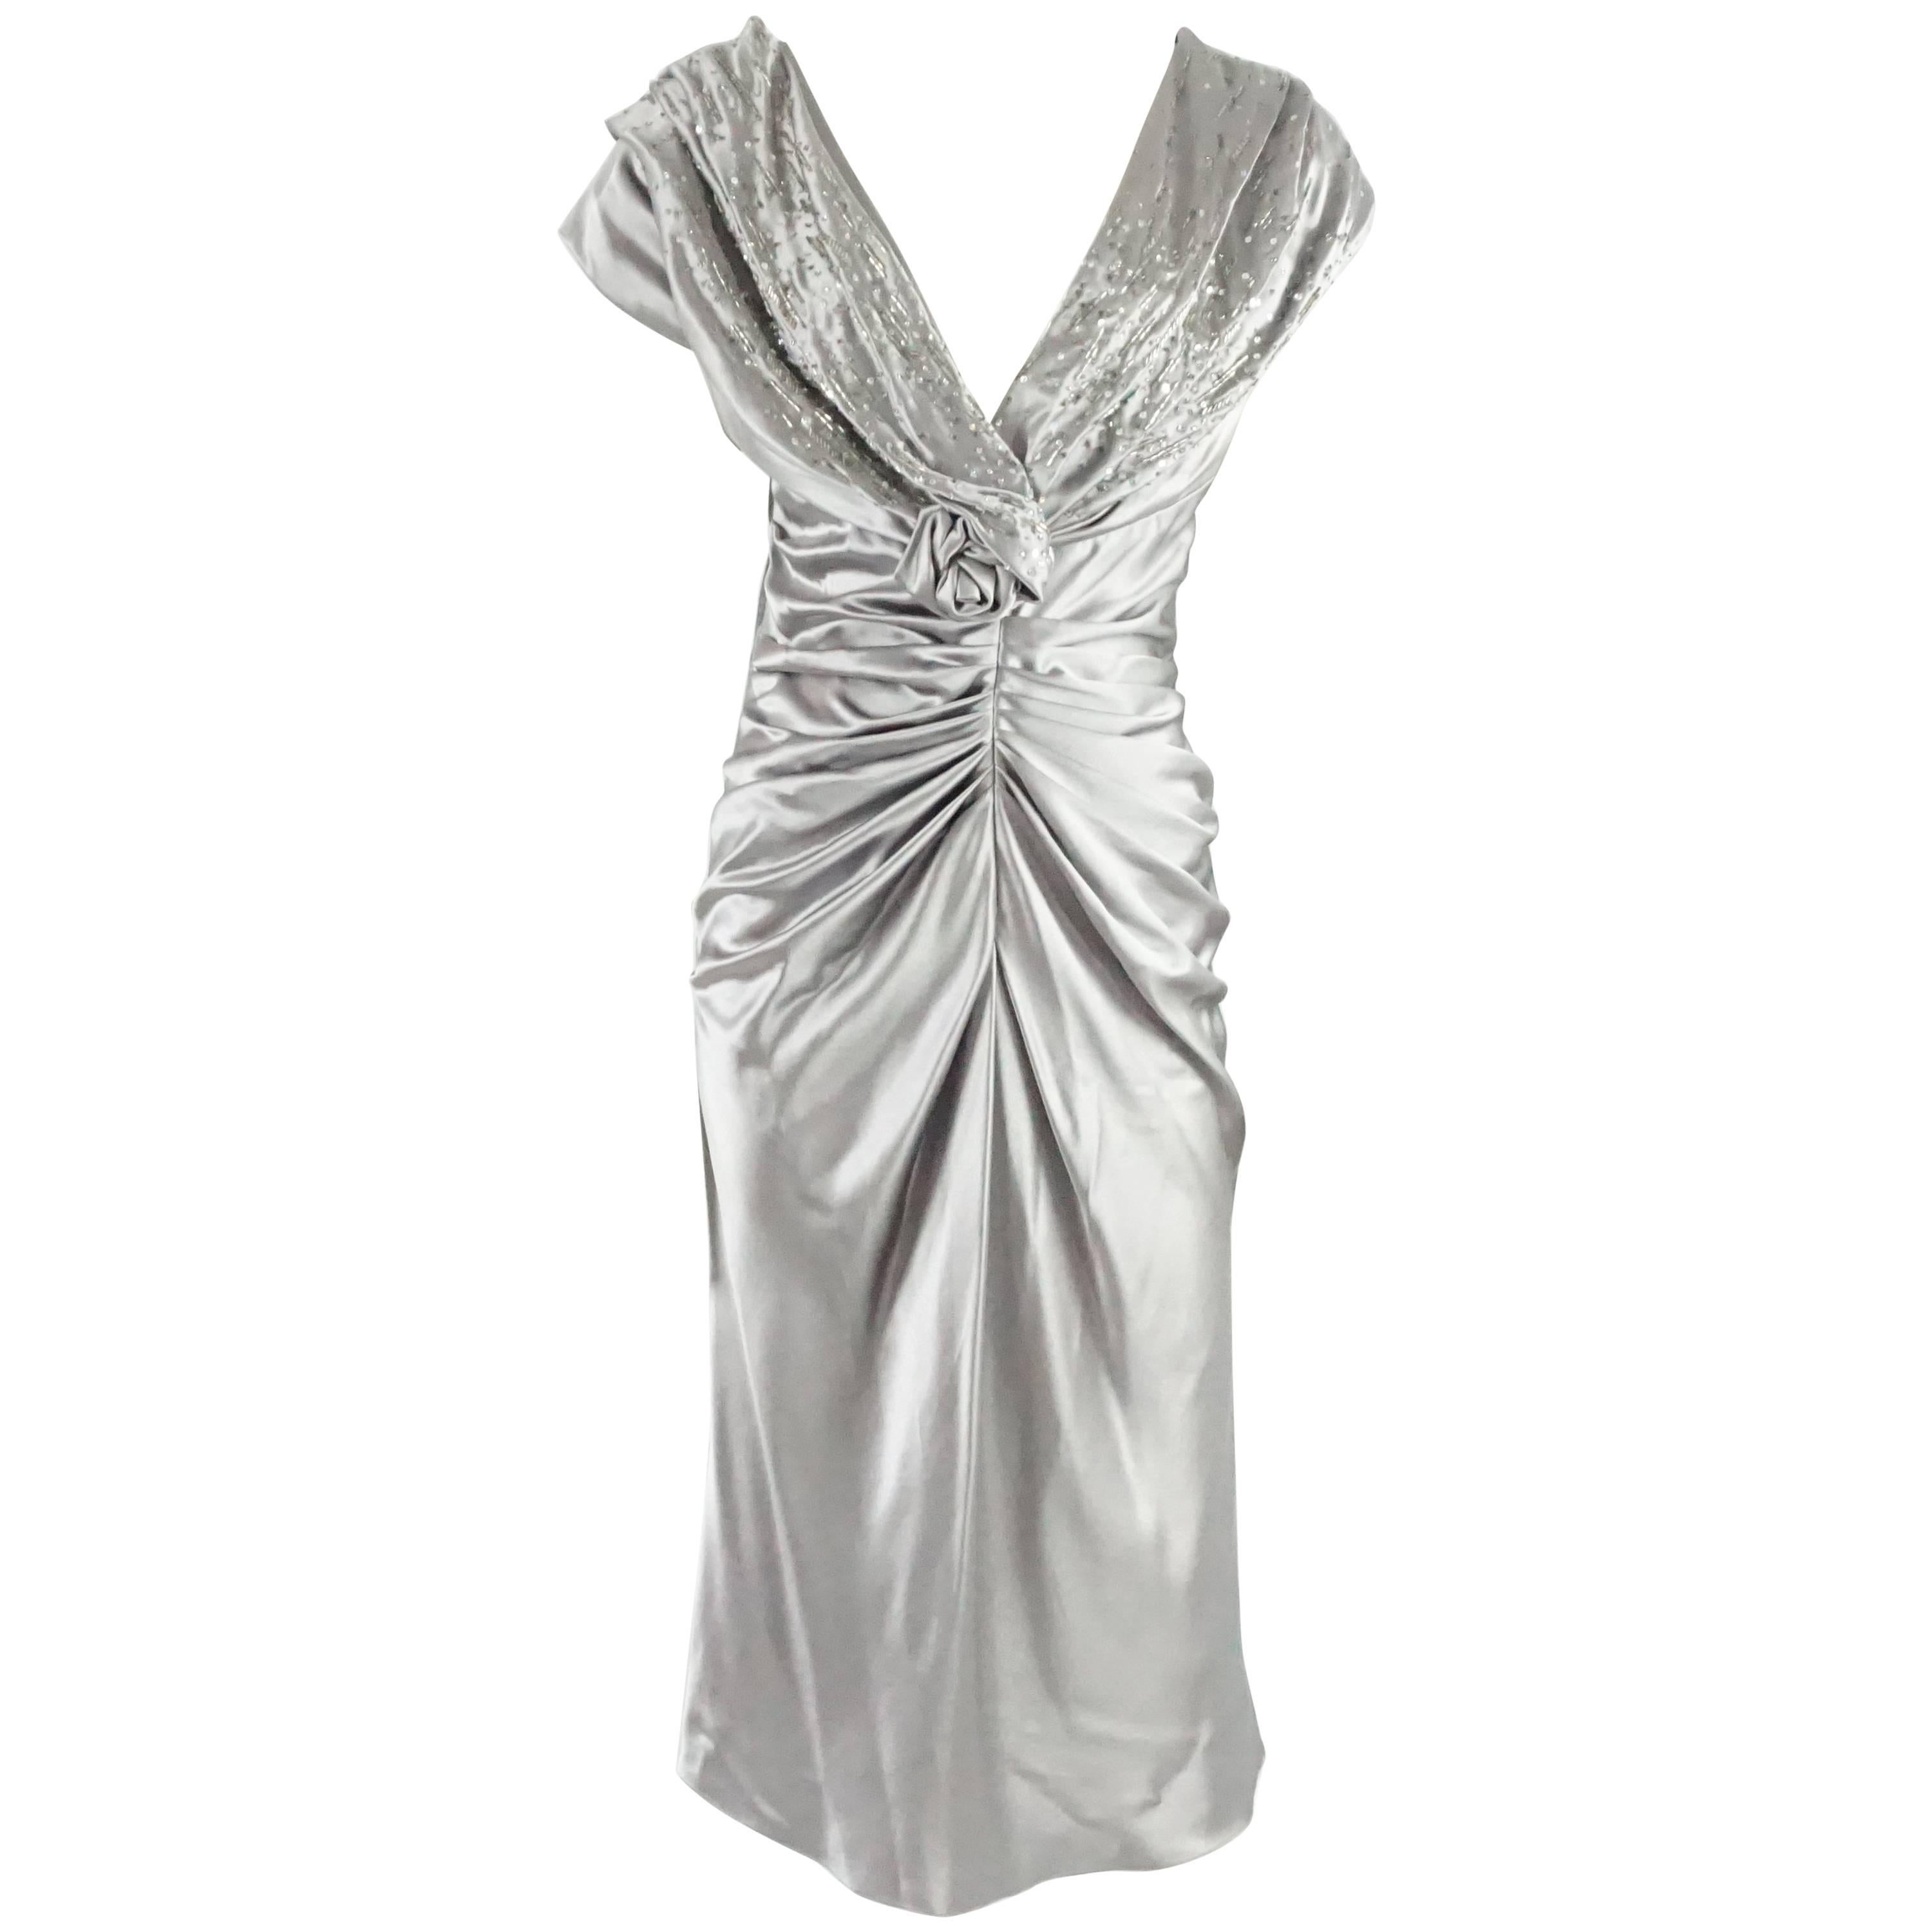 Christian Dior Silver Satin Ruched Beaded Dress - 46